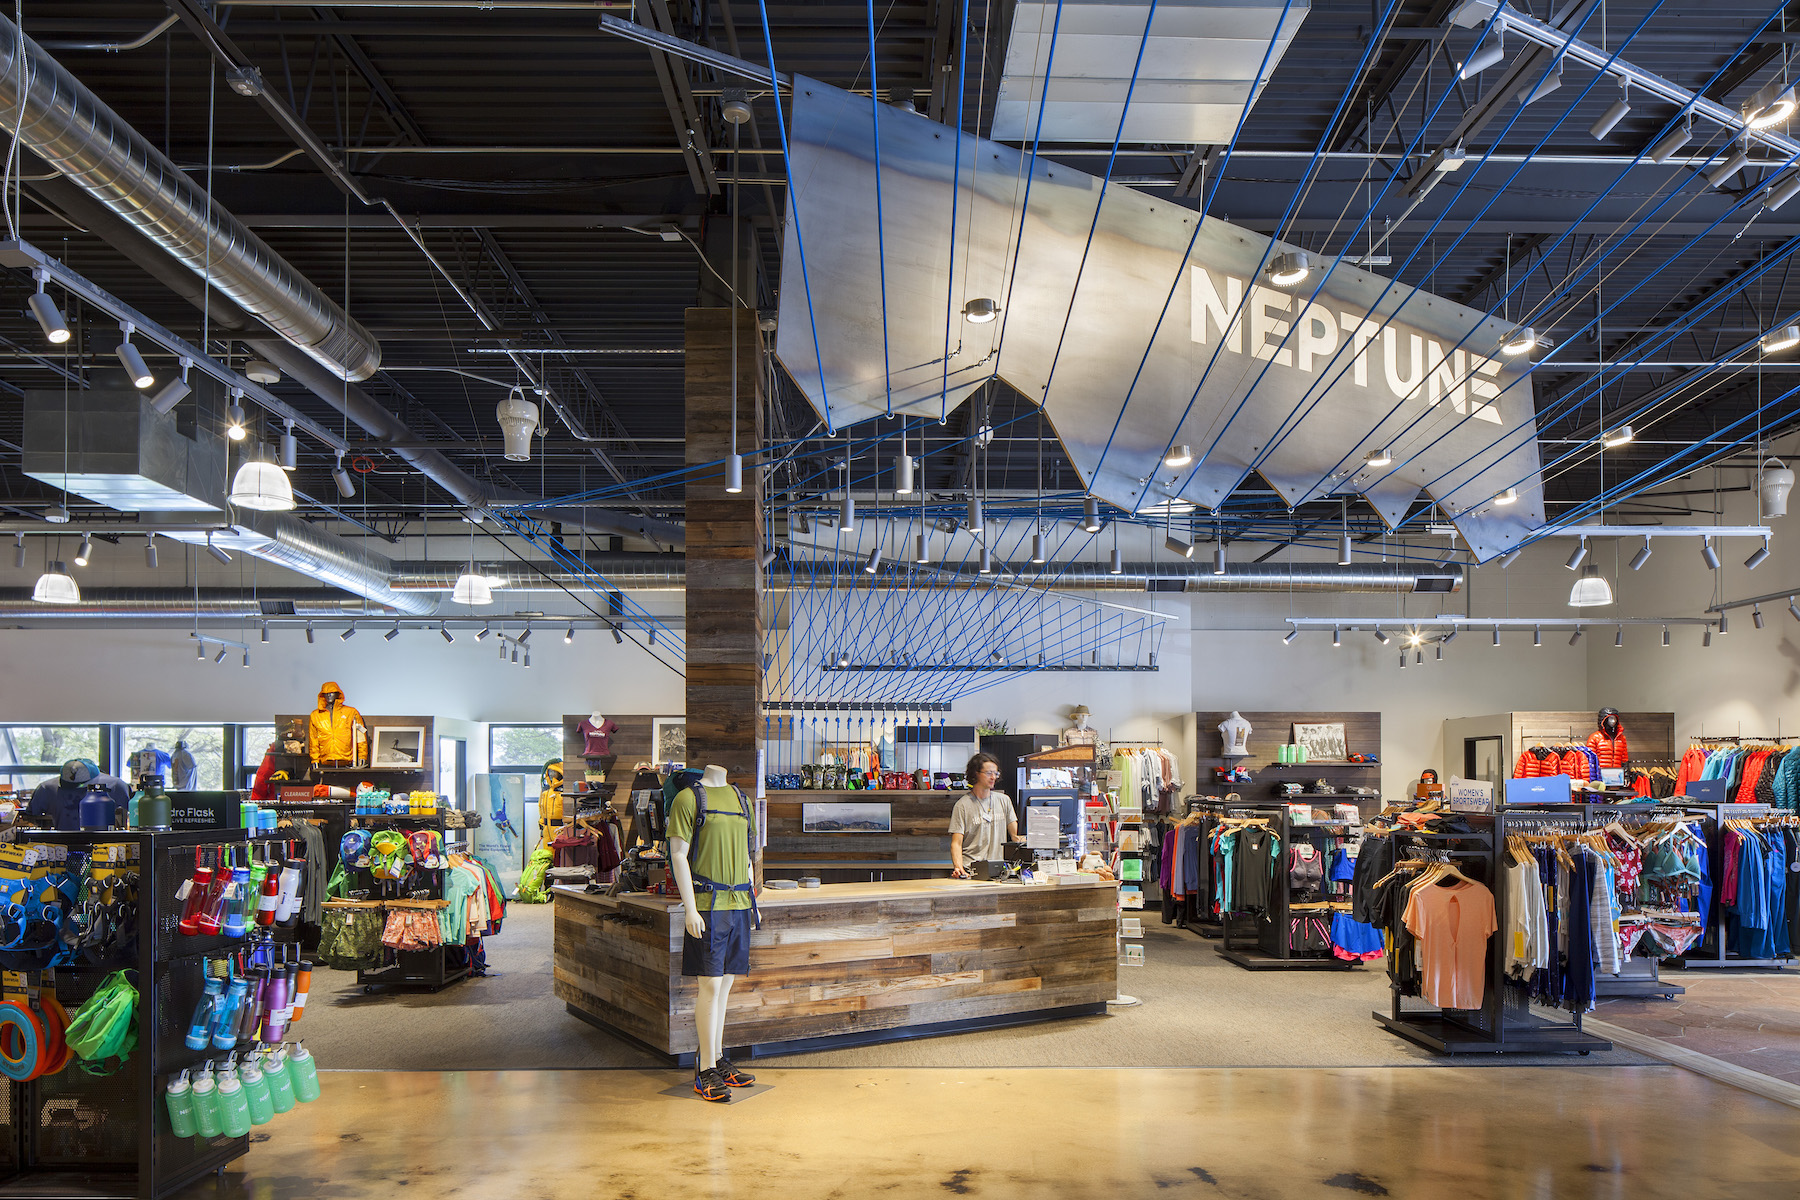 8 Outdoor Apparel Stores for Your Next Trip to the Mountains - 303